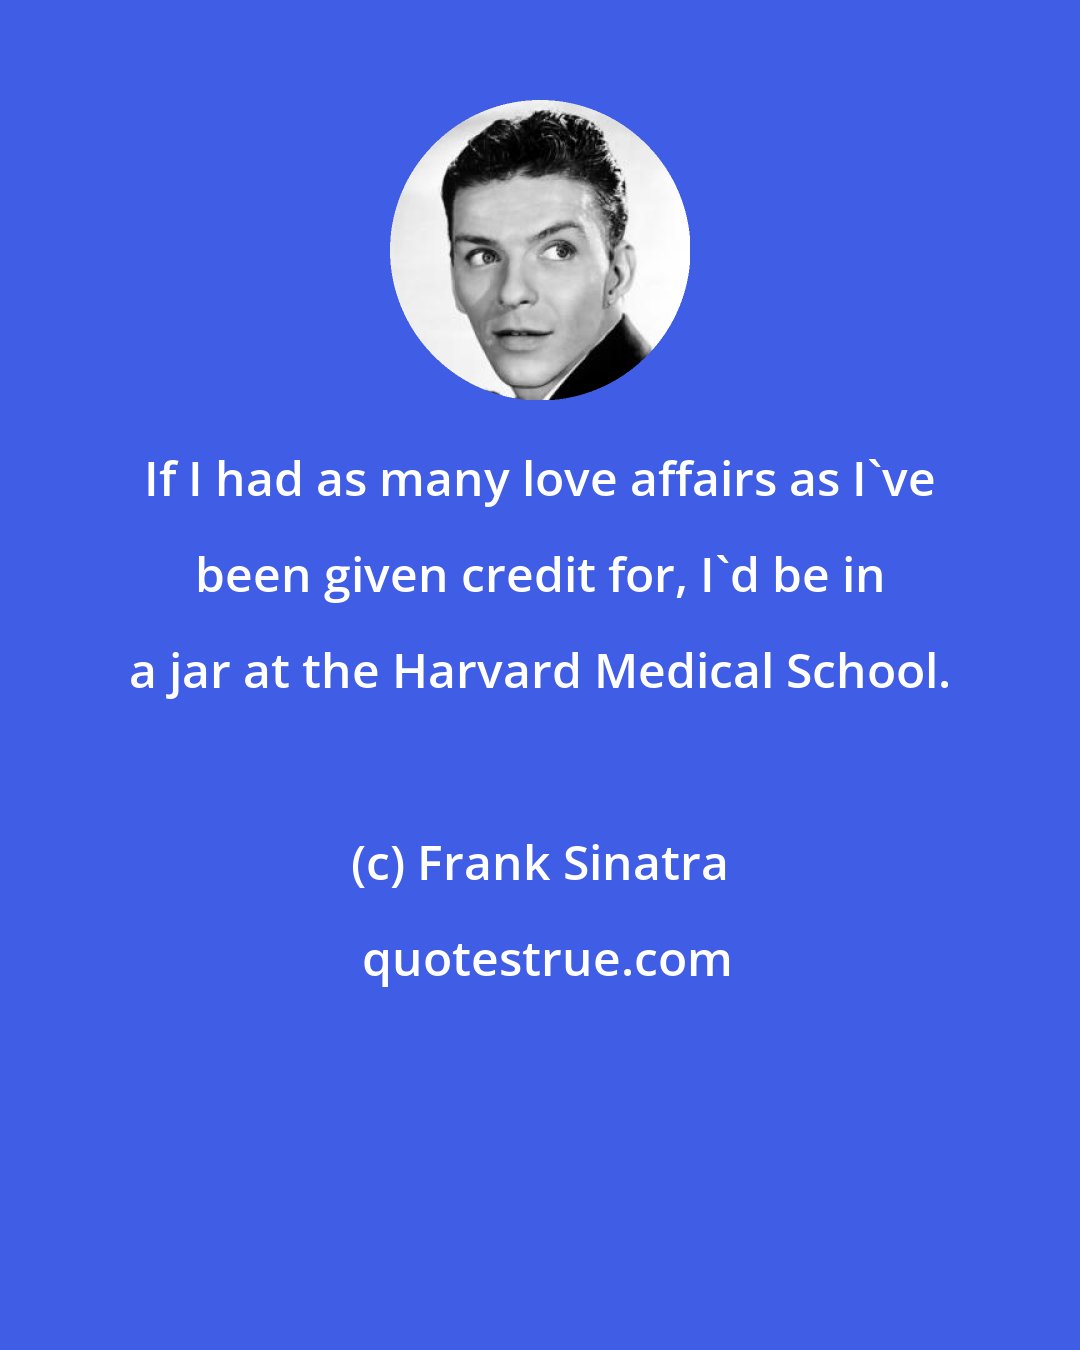 Frank Sinatra: If I had as many love affairs as I've been given credit for, I'd be in a jar at the Harvard Medical School.